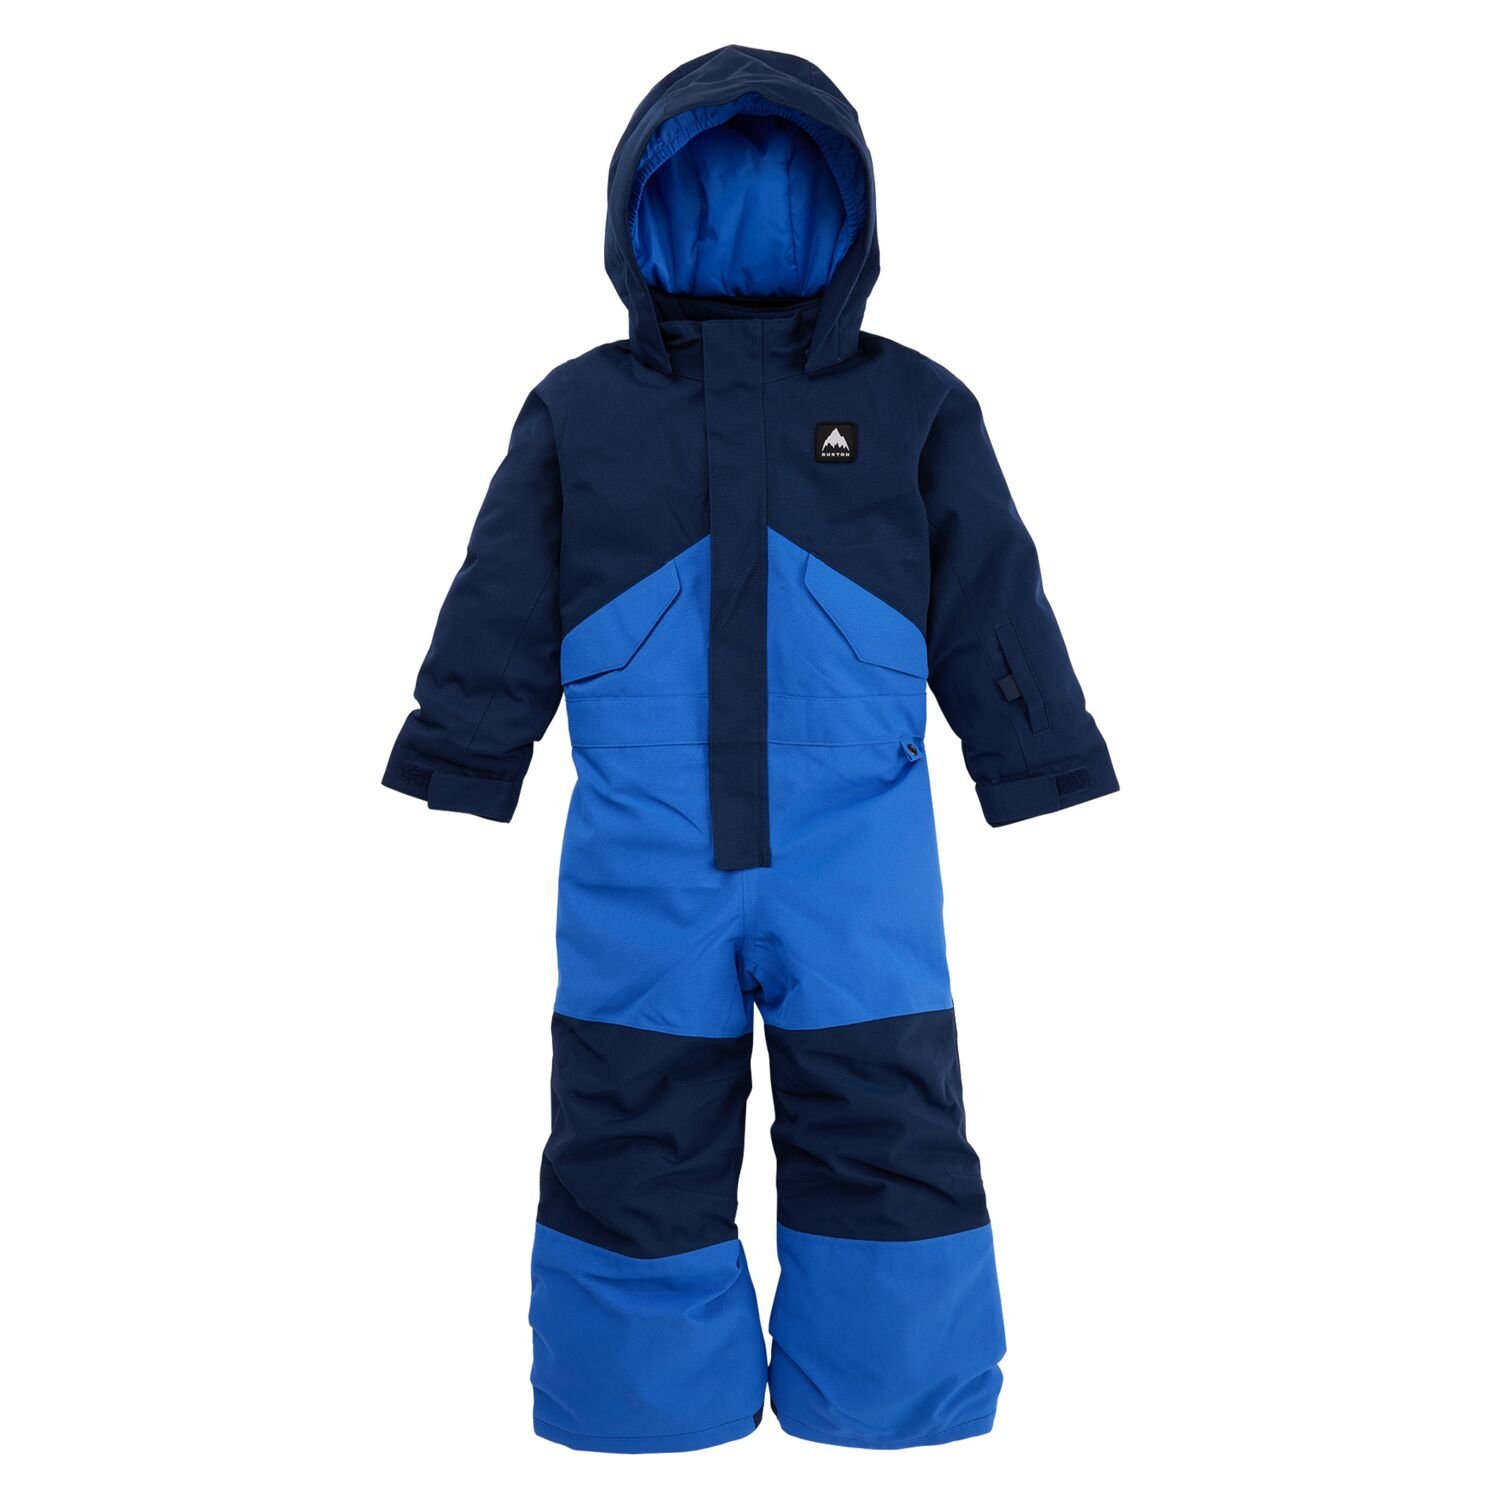 Toddlers' 2L One Piece - LACİVERT - 1